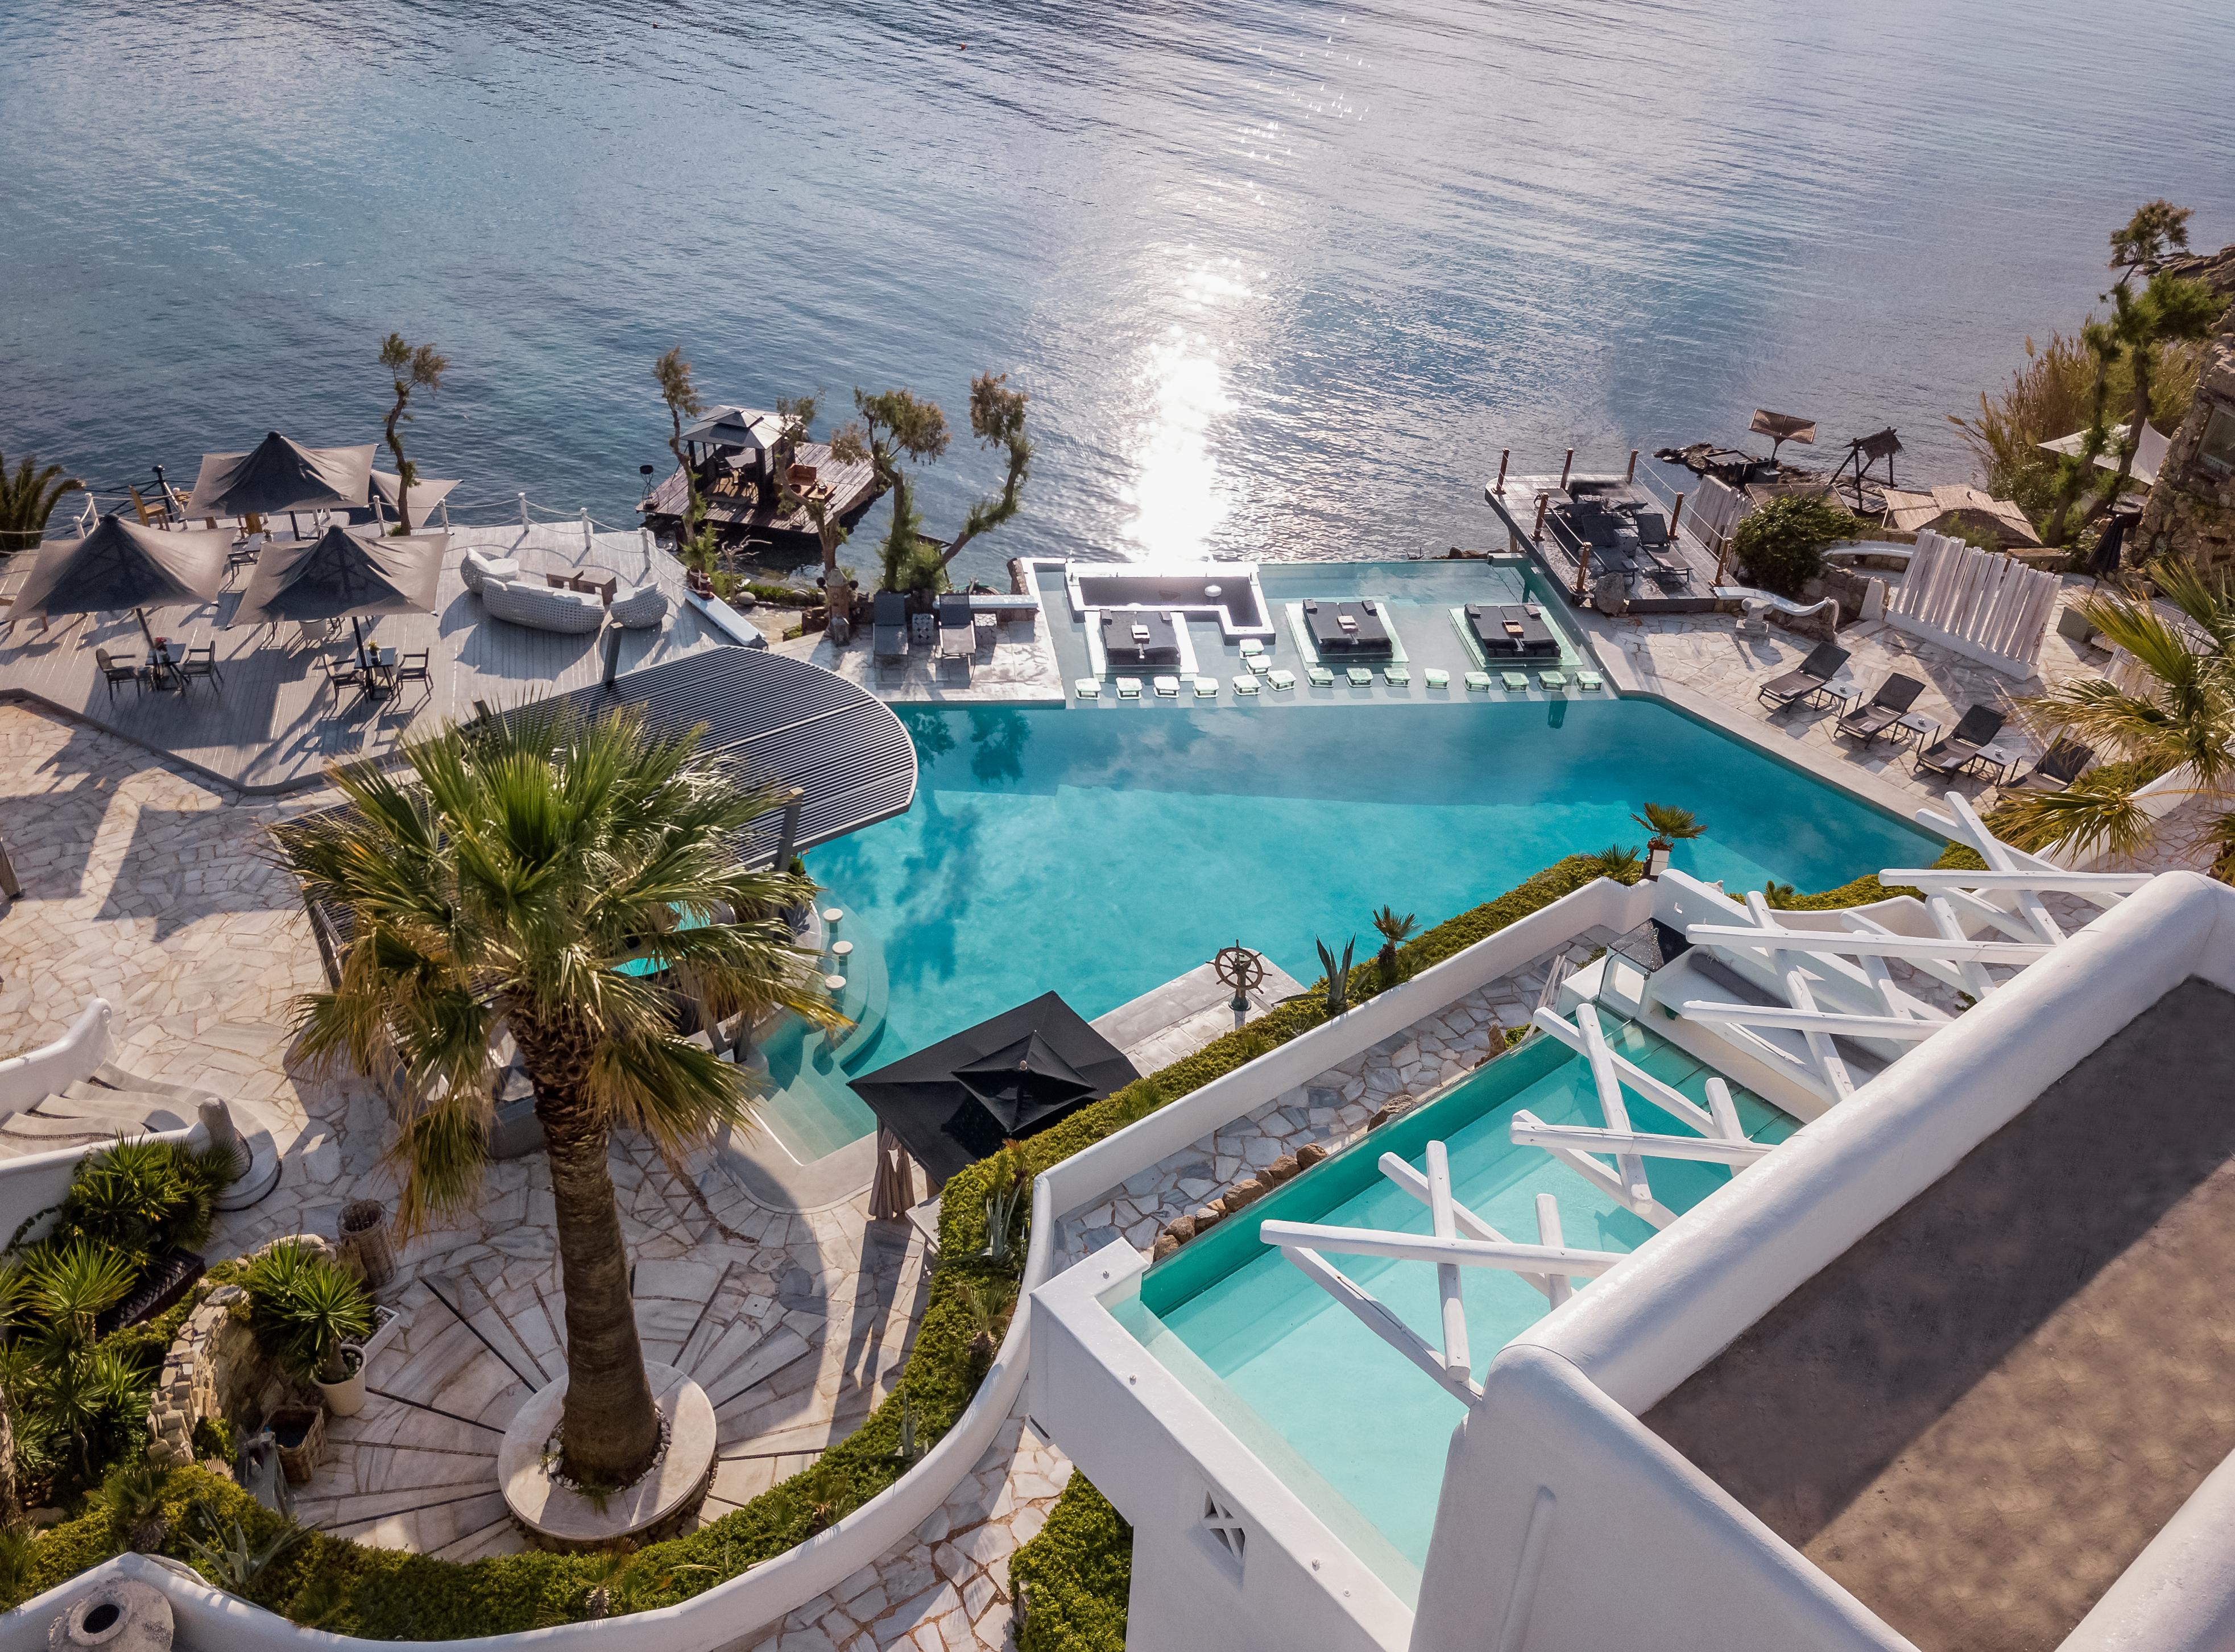 LOUIS VUITTON TAKES OVER THE POOL AT ZUMA MYKONOS - Hotel News ME